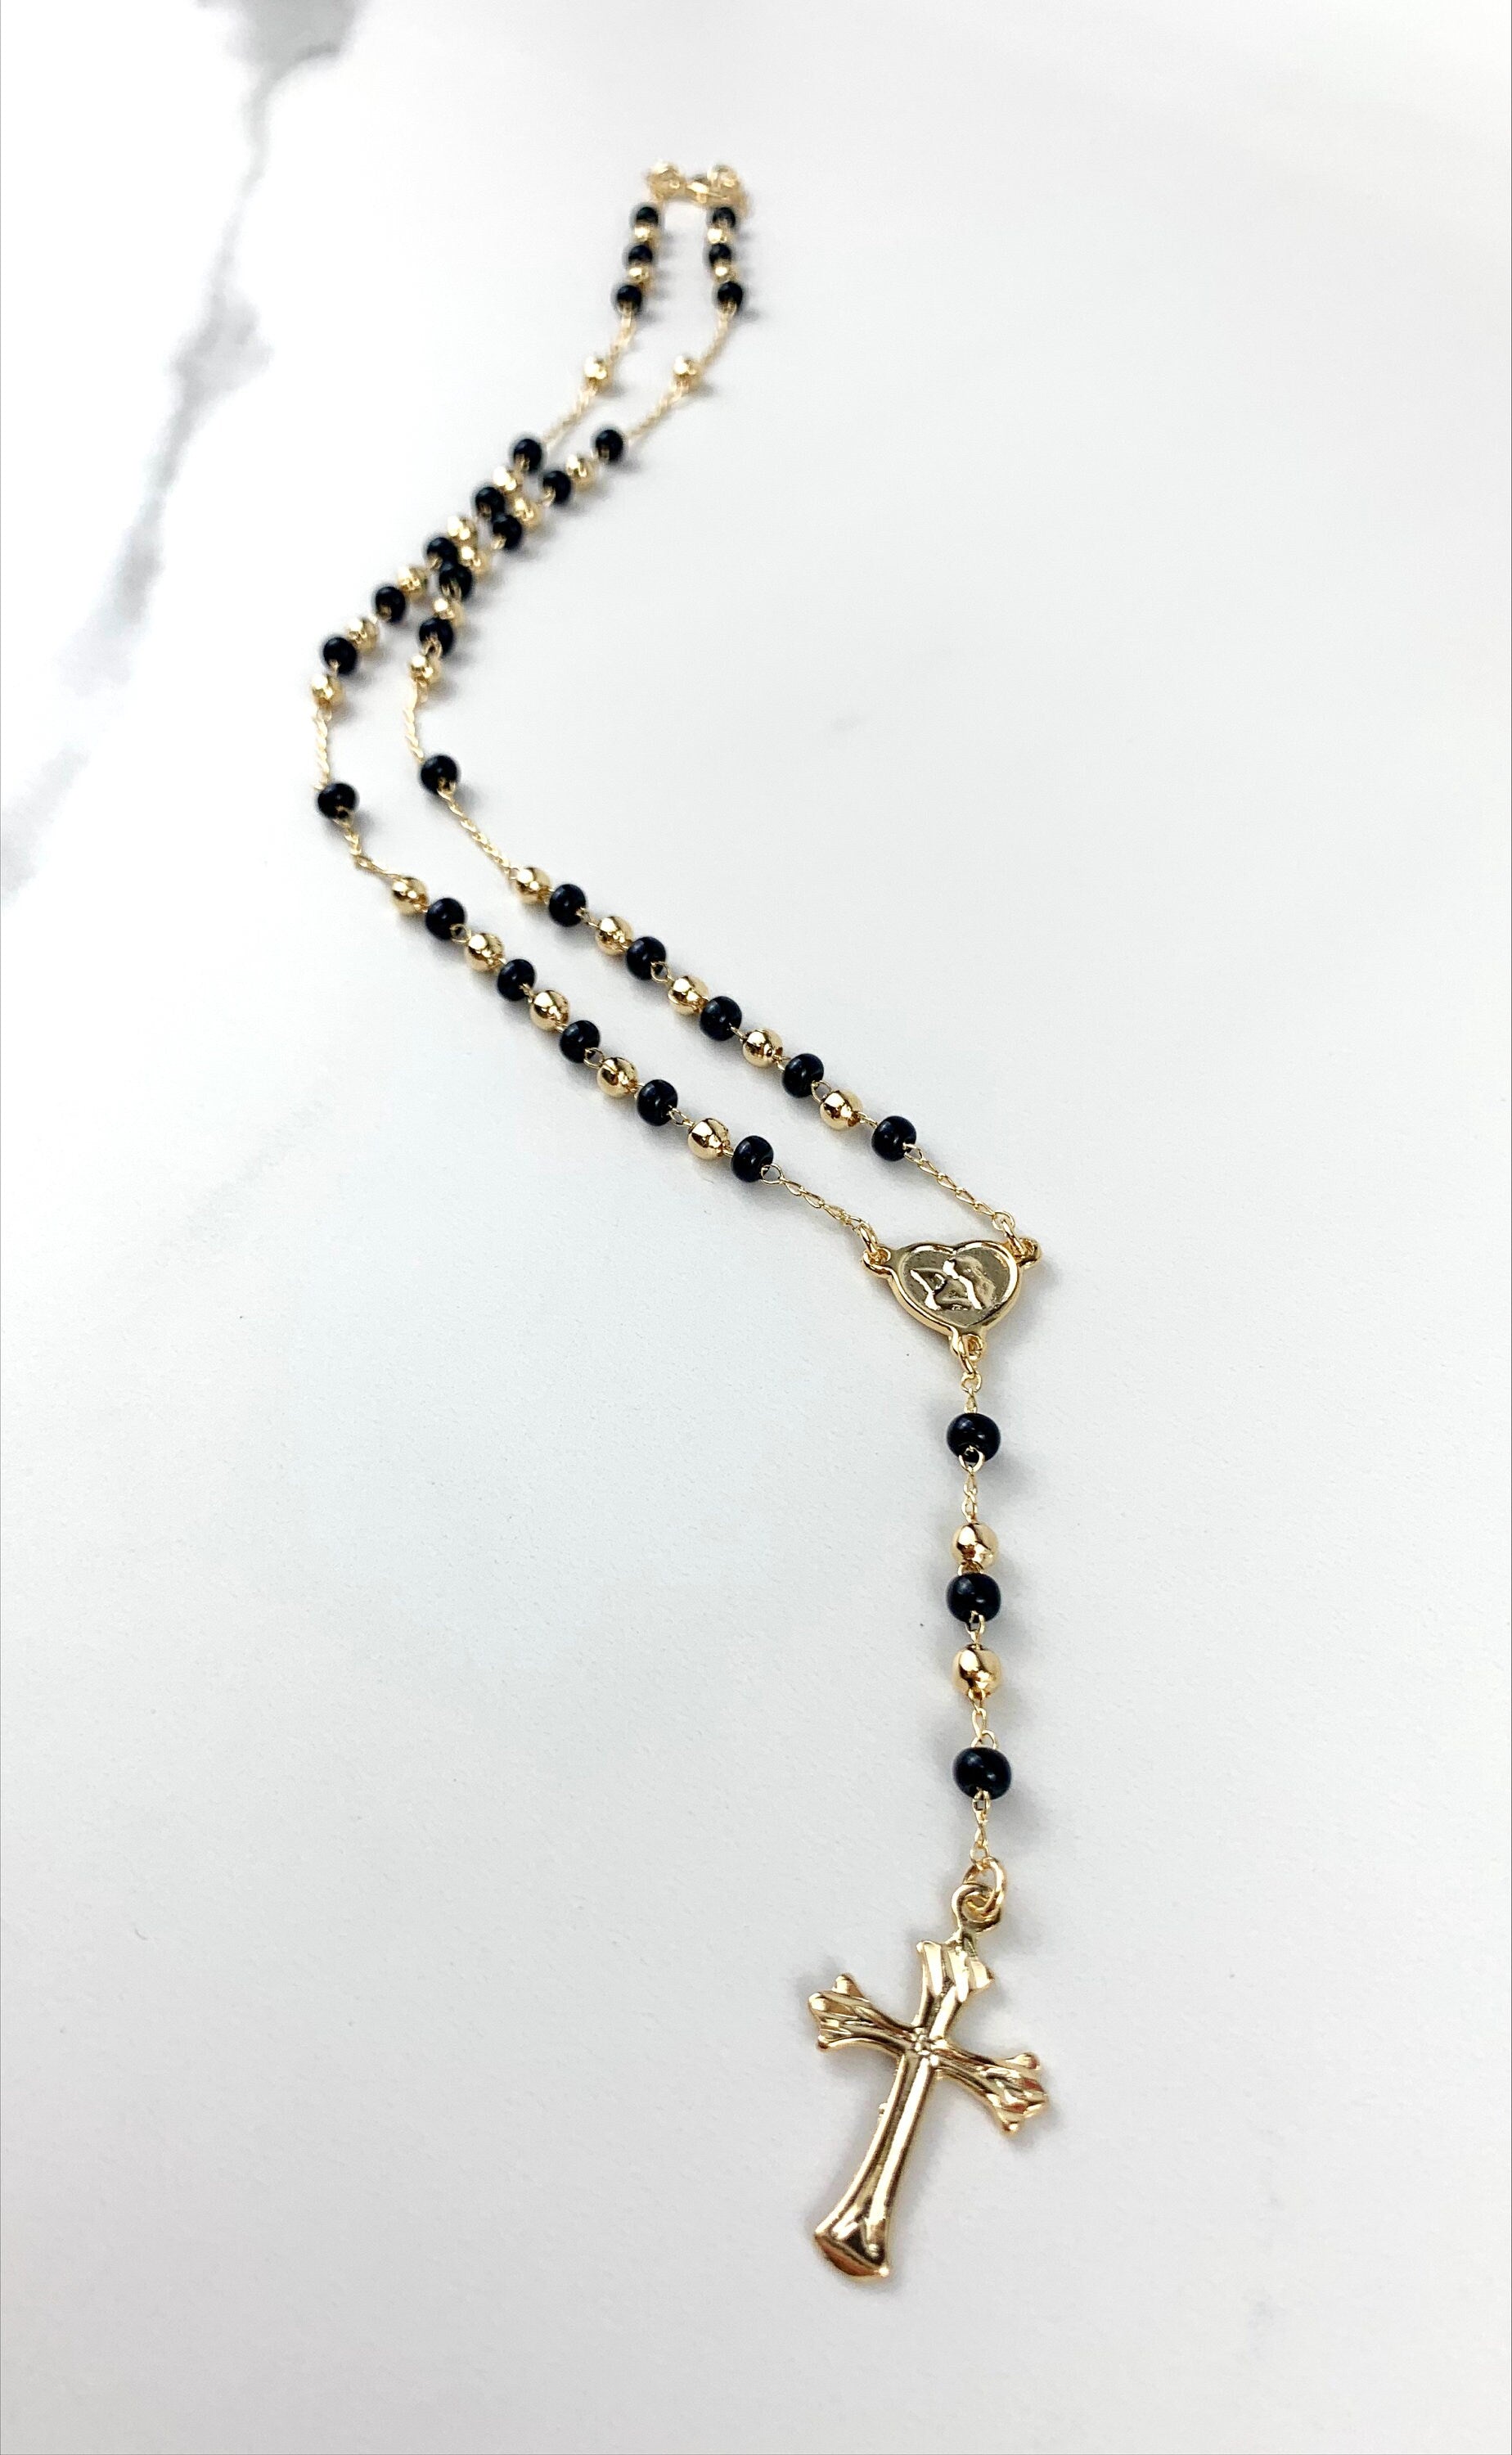 18k Gold Filled Black & Gold Beads, Heart Shape Angel Rosary Necklace, Religious Jewelry, Wholesale Jewelry Making Supplies